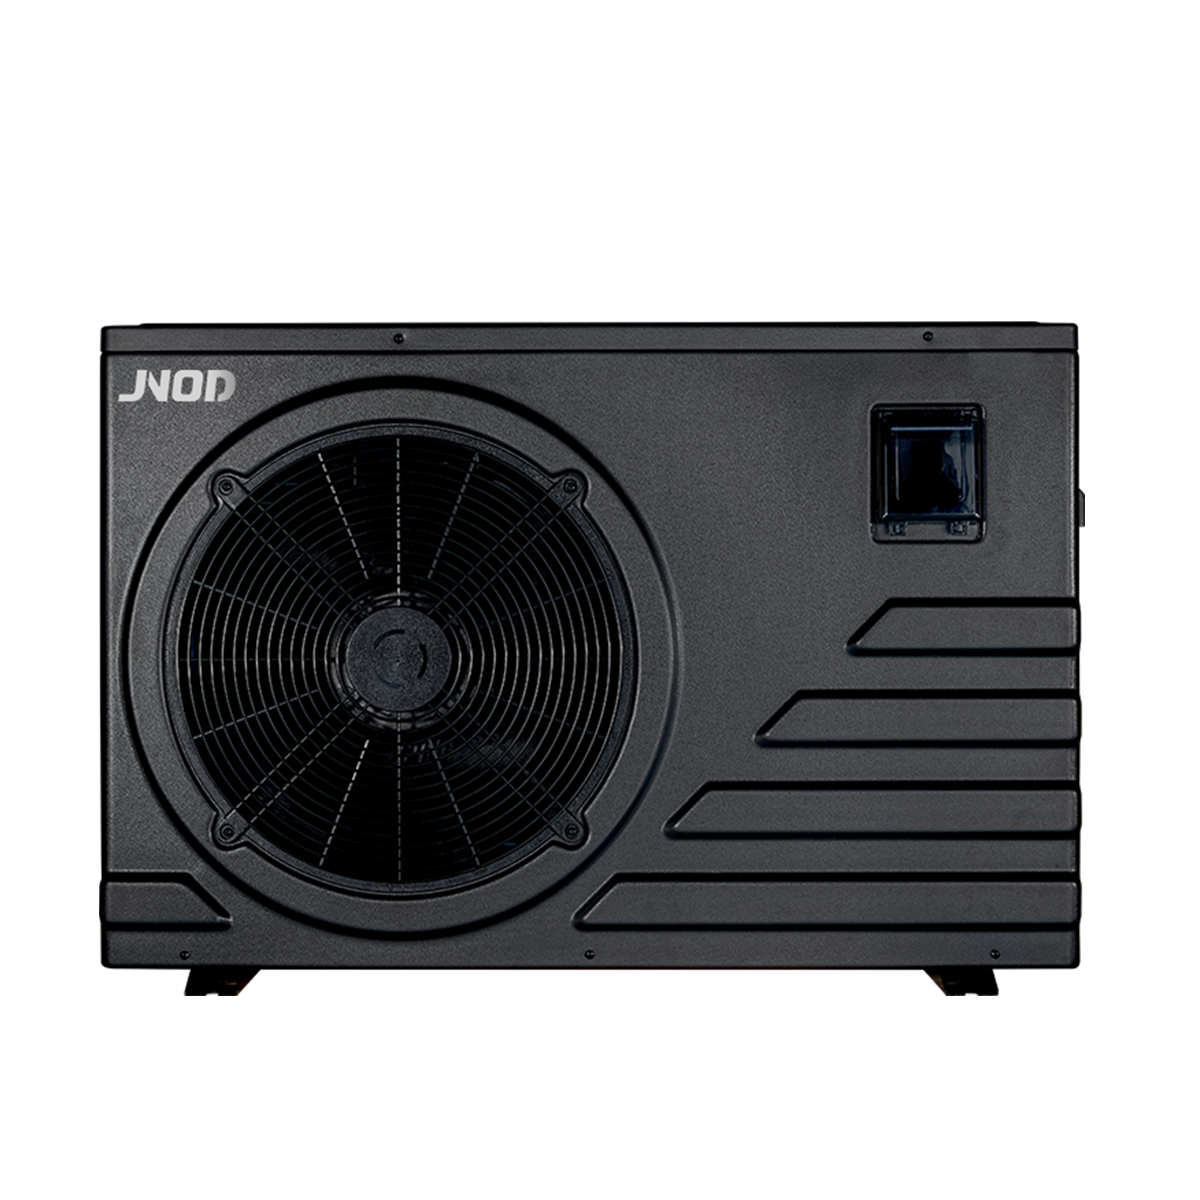 Dc Inverter Commercial Eco Hotels Swimming Pool Heat Pump